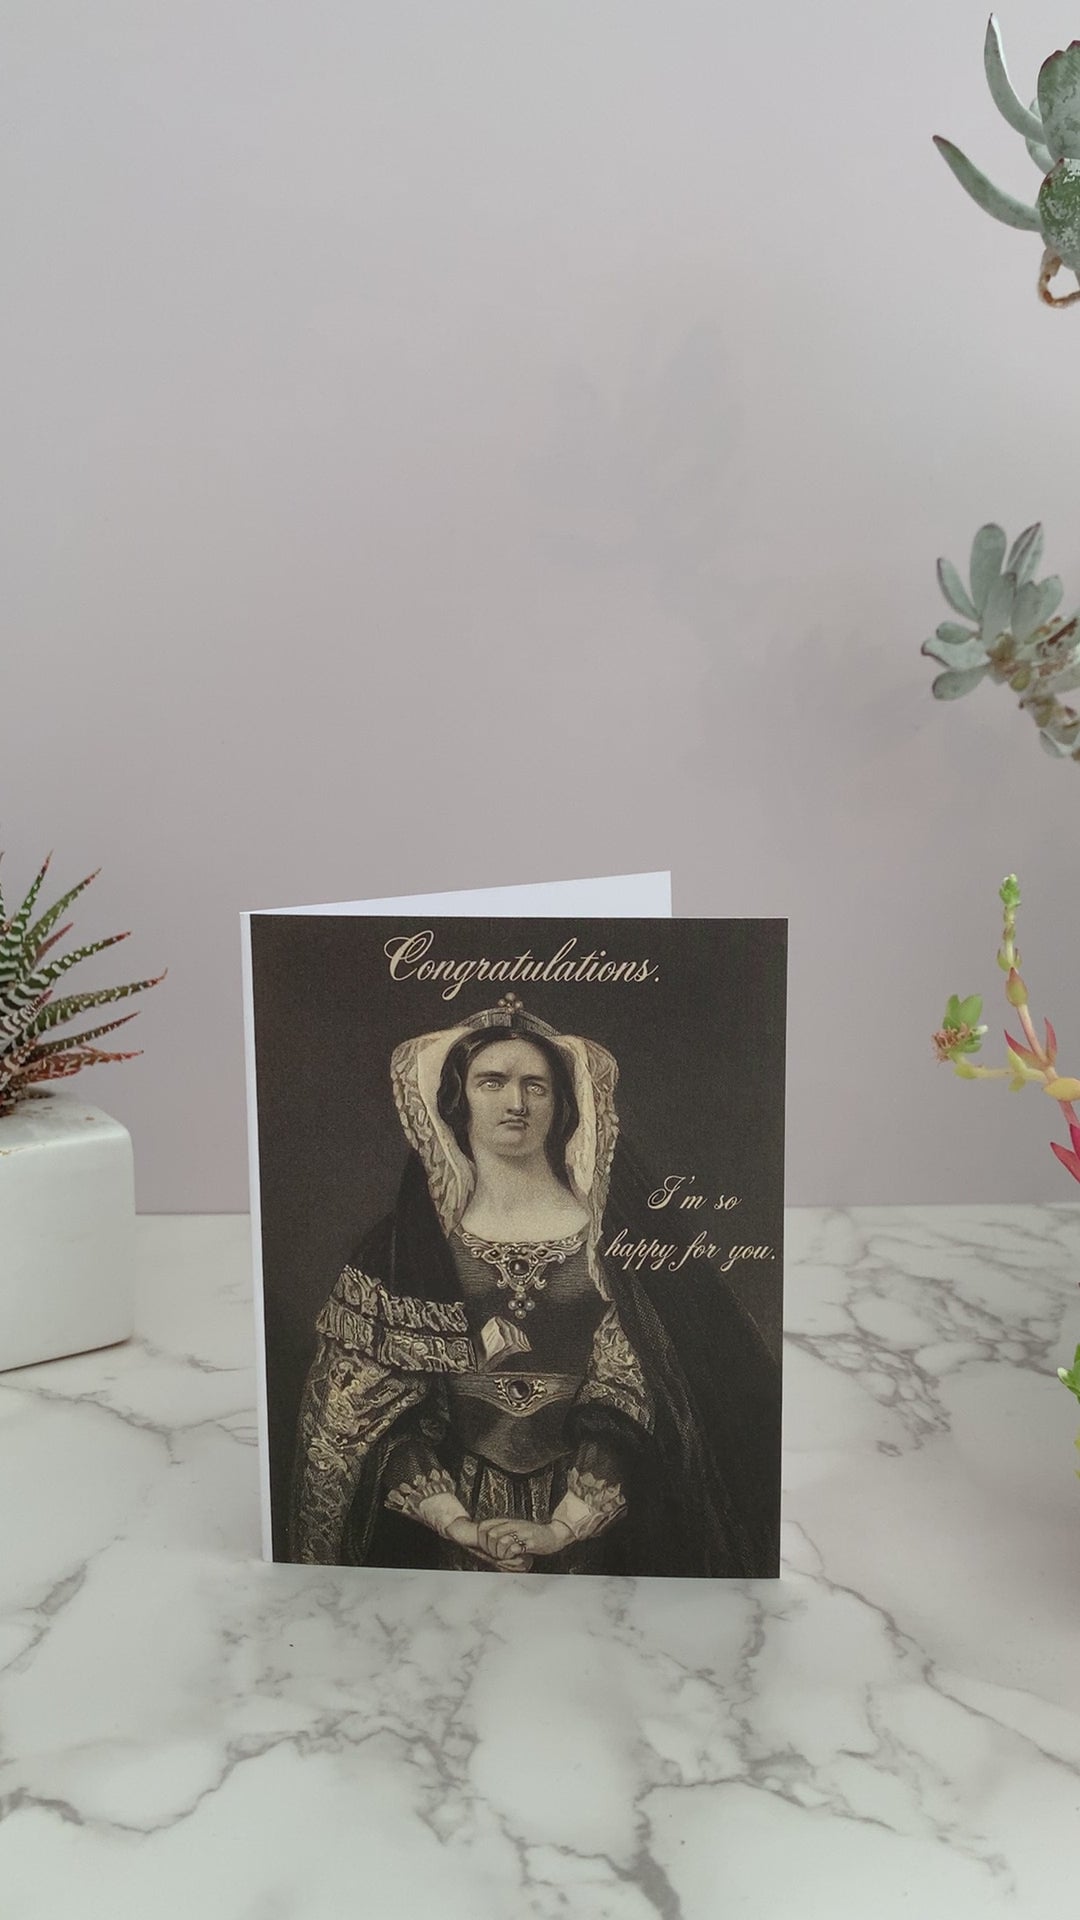 All purpose greeting card that says "Congratulations. I'm so happy for you." on the front. Color is shades of black and cream. Features a vintage image of a woman, extravagantly dressed, with a vacant stare. coin laundry  